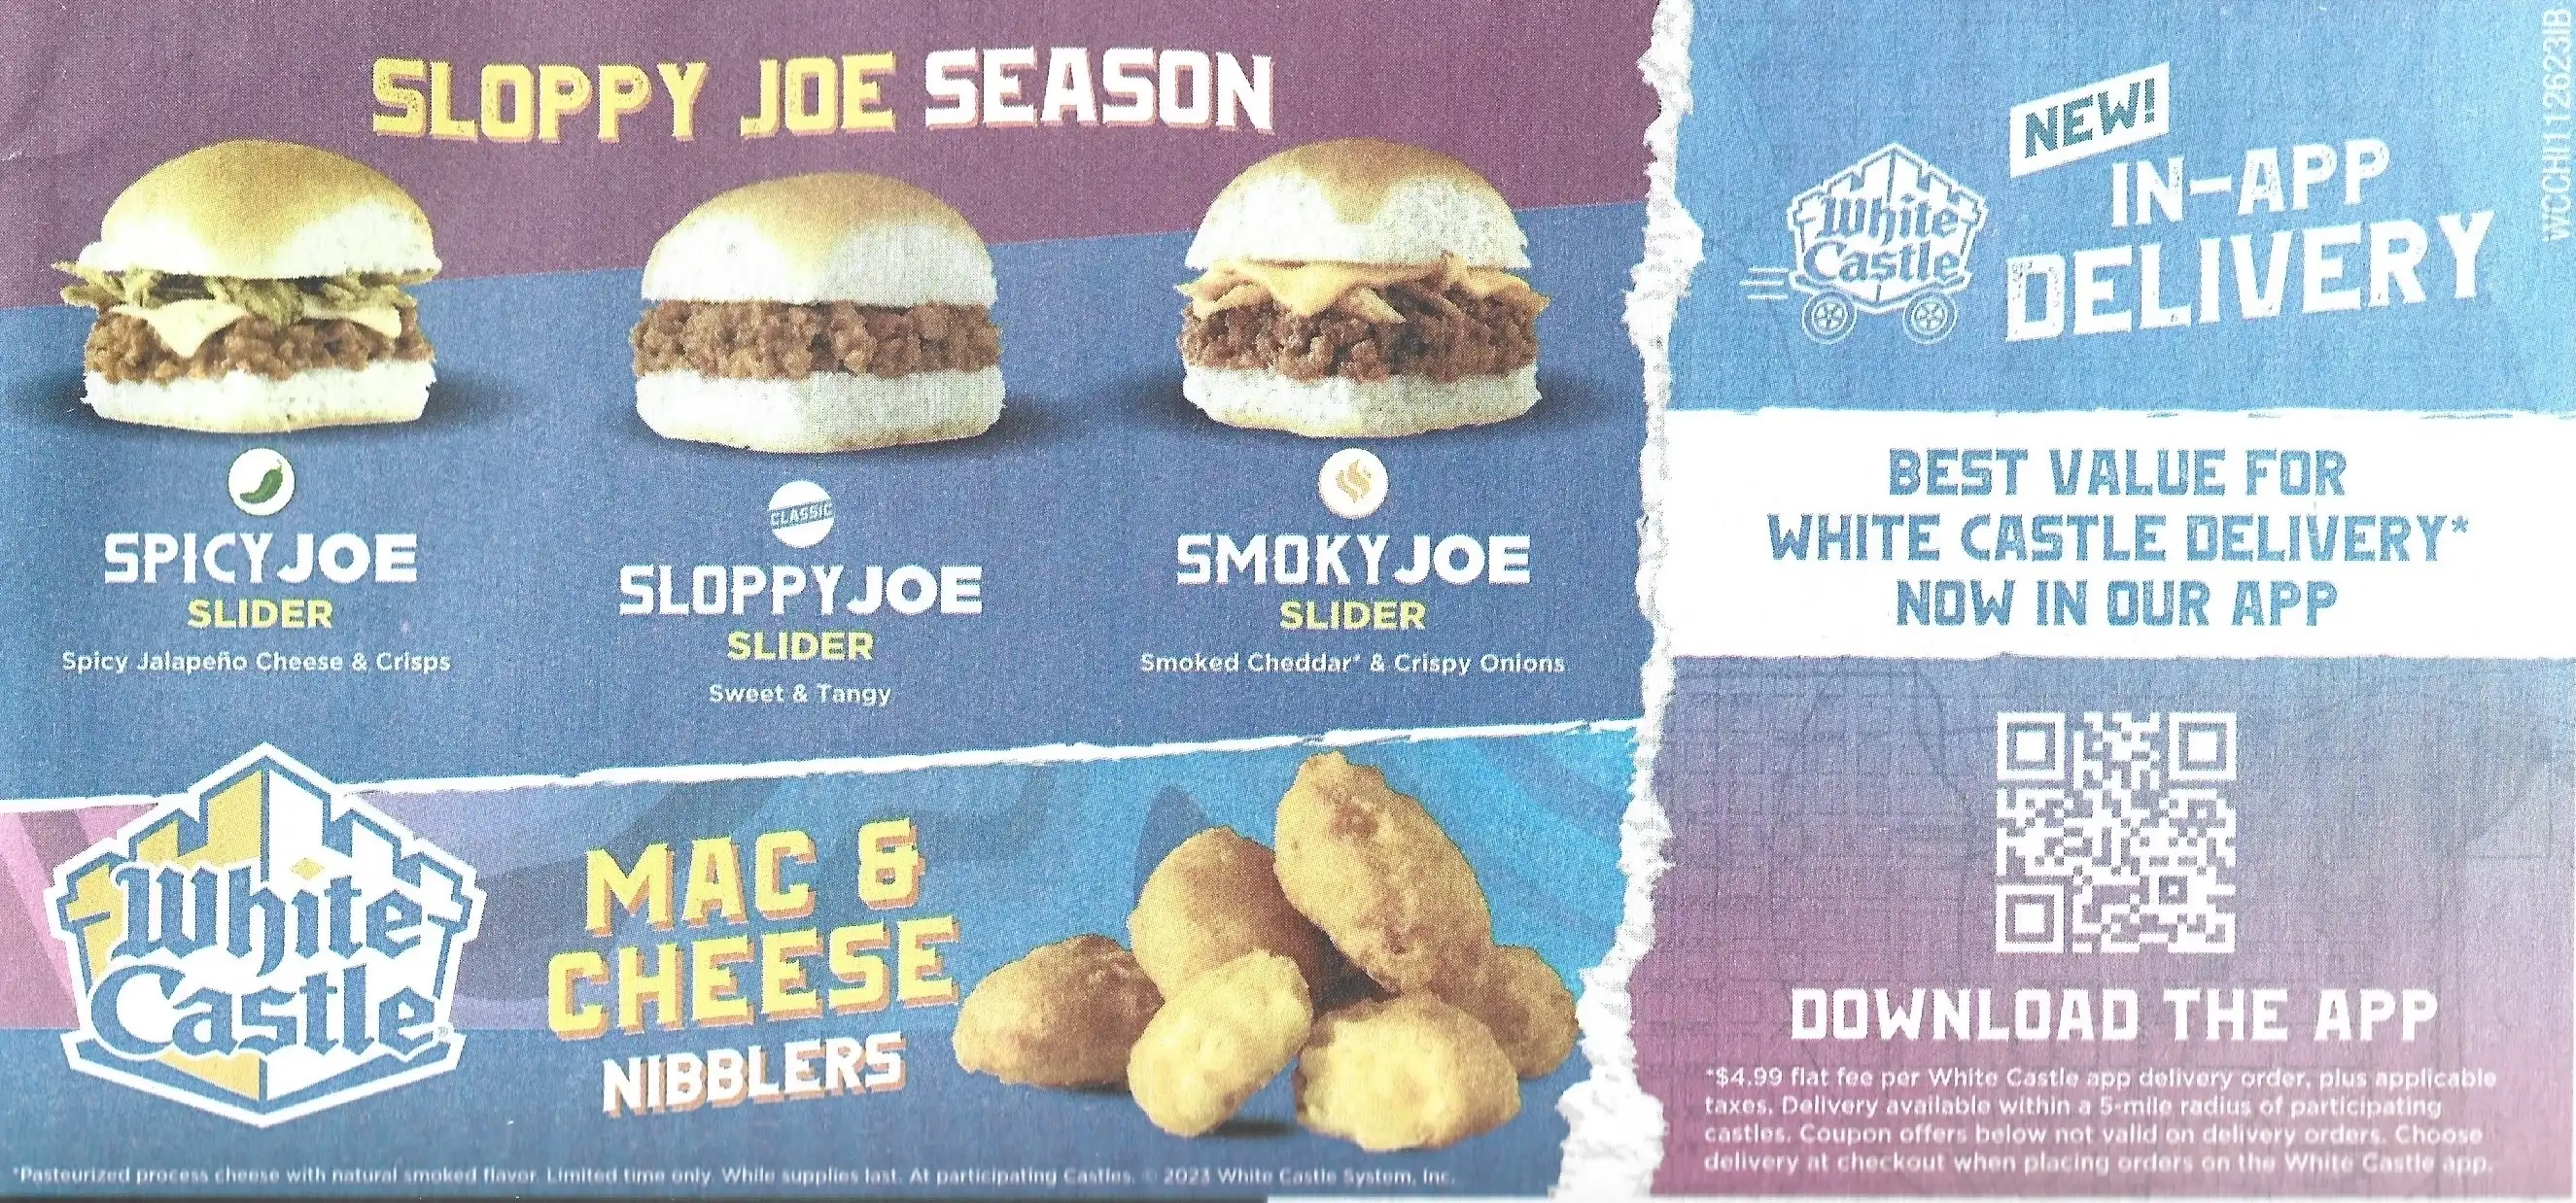 White Castle Mailer Coupons - Expires 12/31/2023